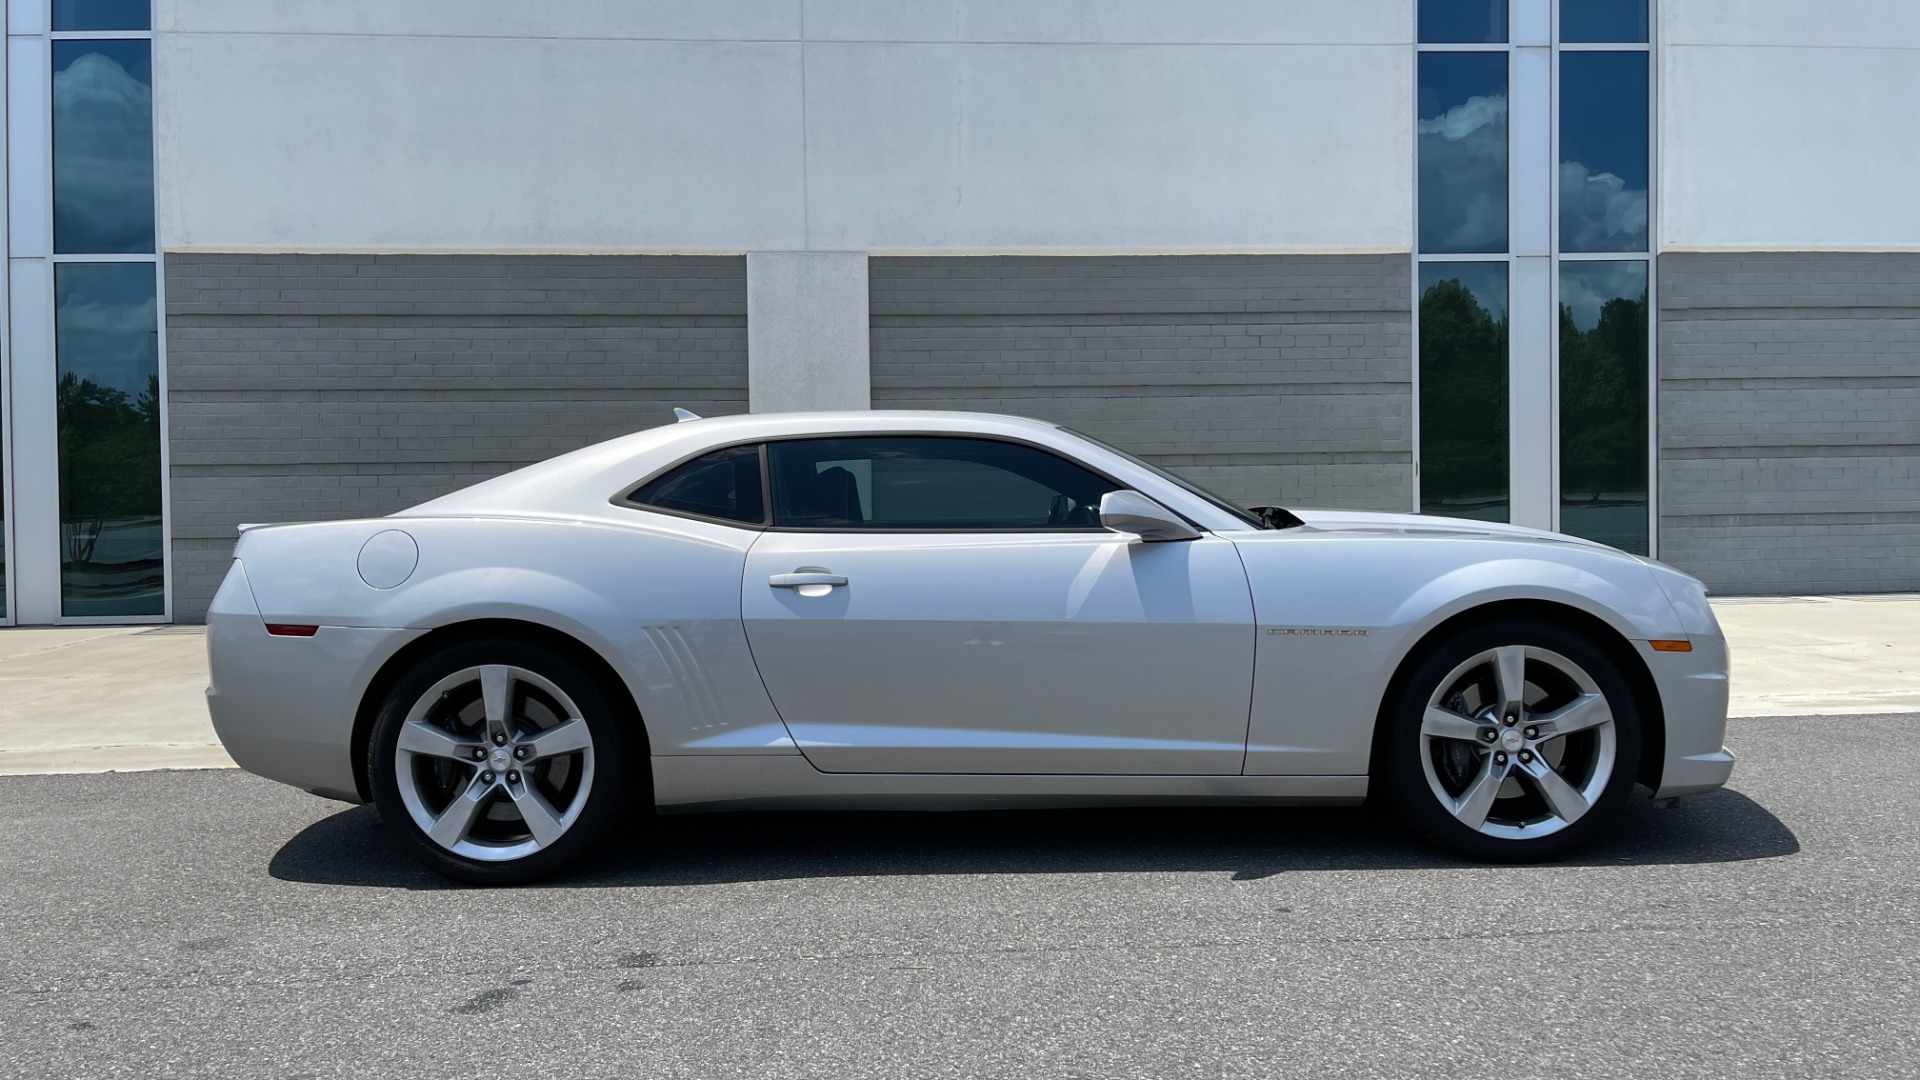 Used 2012 Chevrolet CAMARO SS COUPE / 6.2L V8 / 2SS / RS PKG / 6-SPD AUTO / SUNROOF / REMOTE START for sale Sold at Formula Imports in Charlotte NC 28227 8